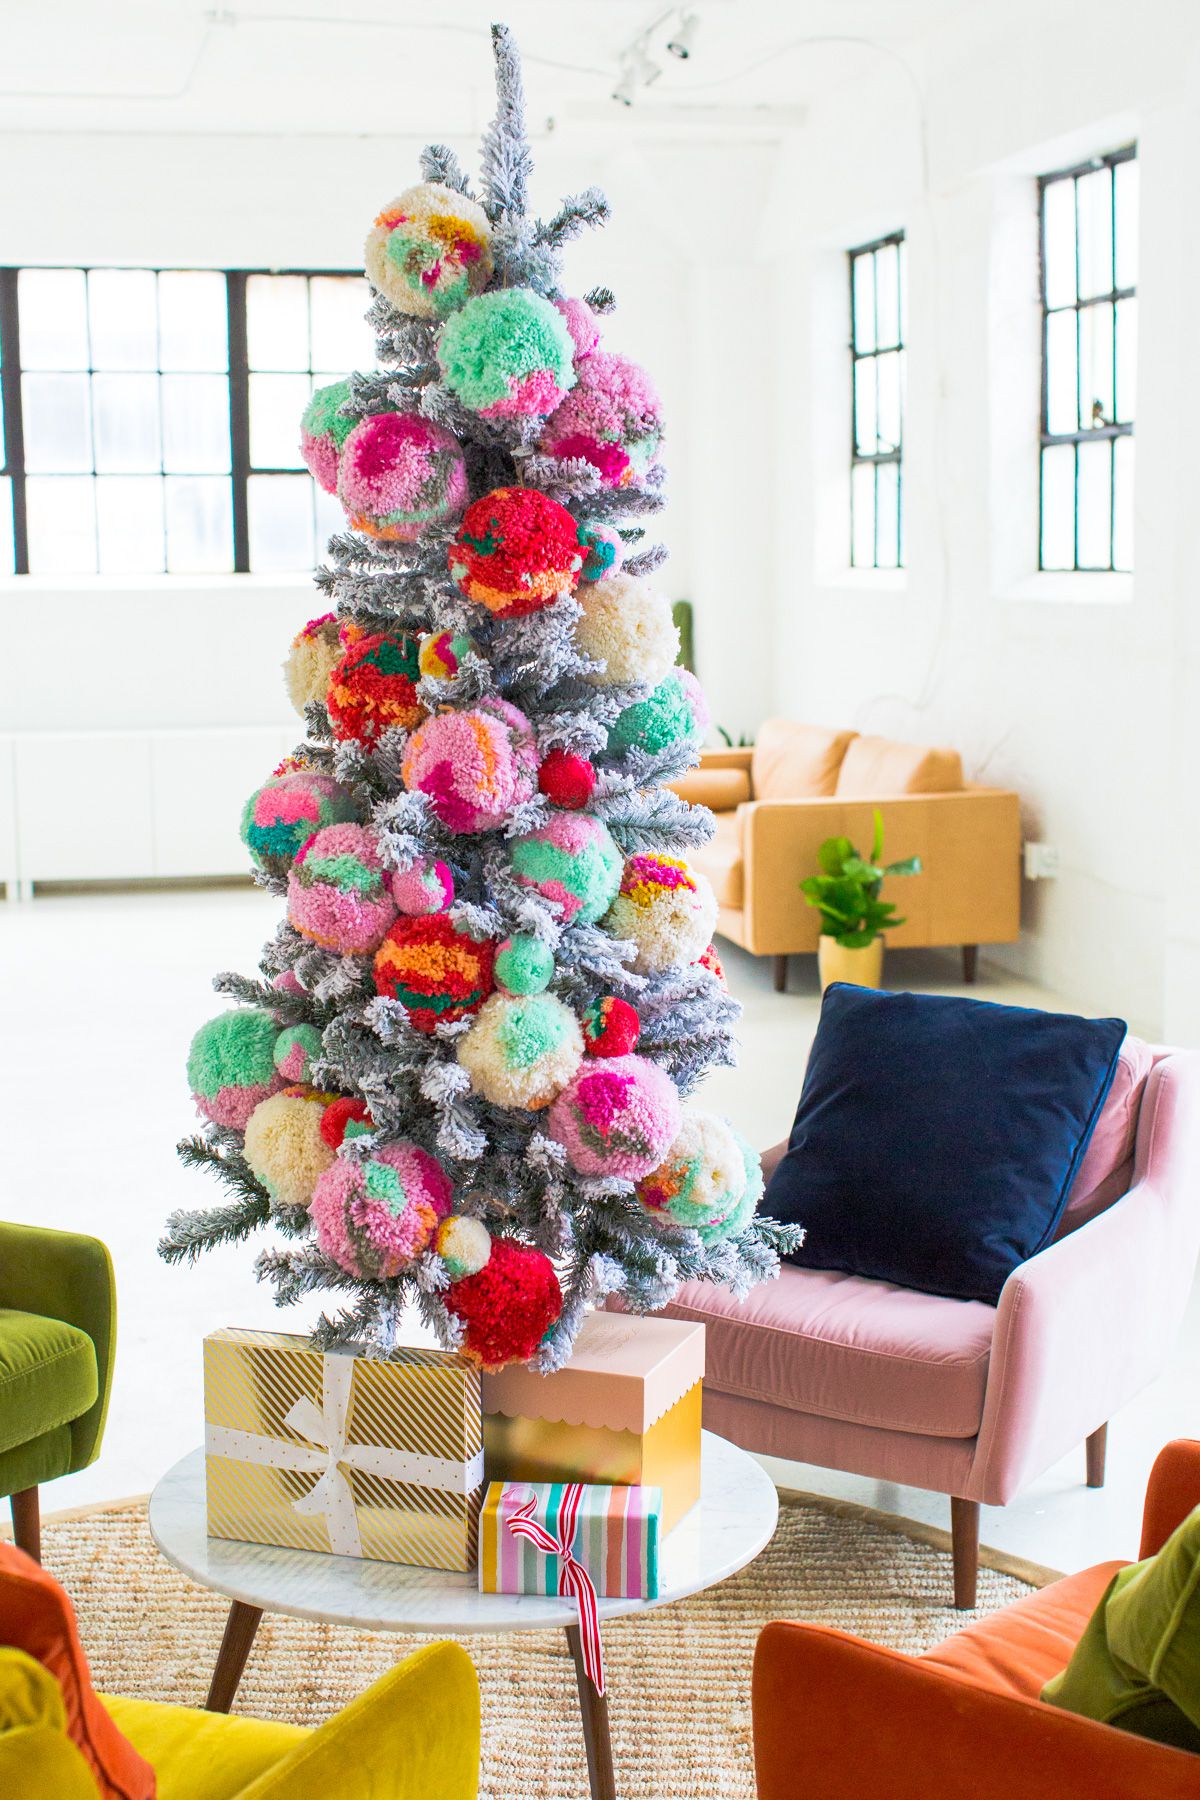 50 Christmas Tree Decoration Ideas - Pictures of Beautiful Christmas